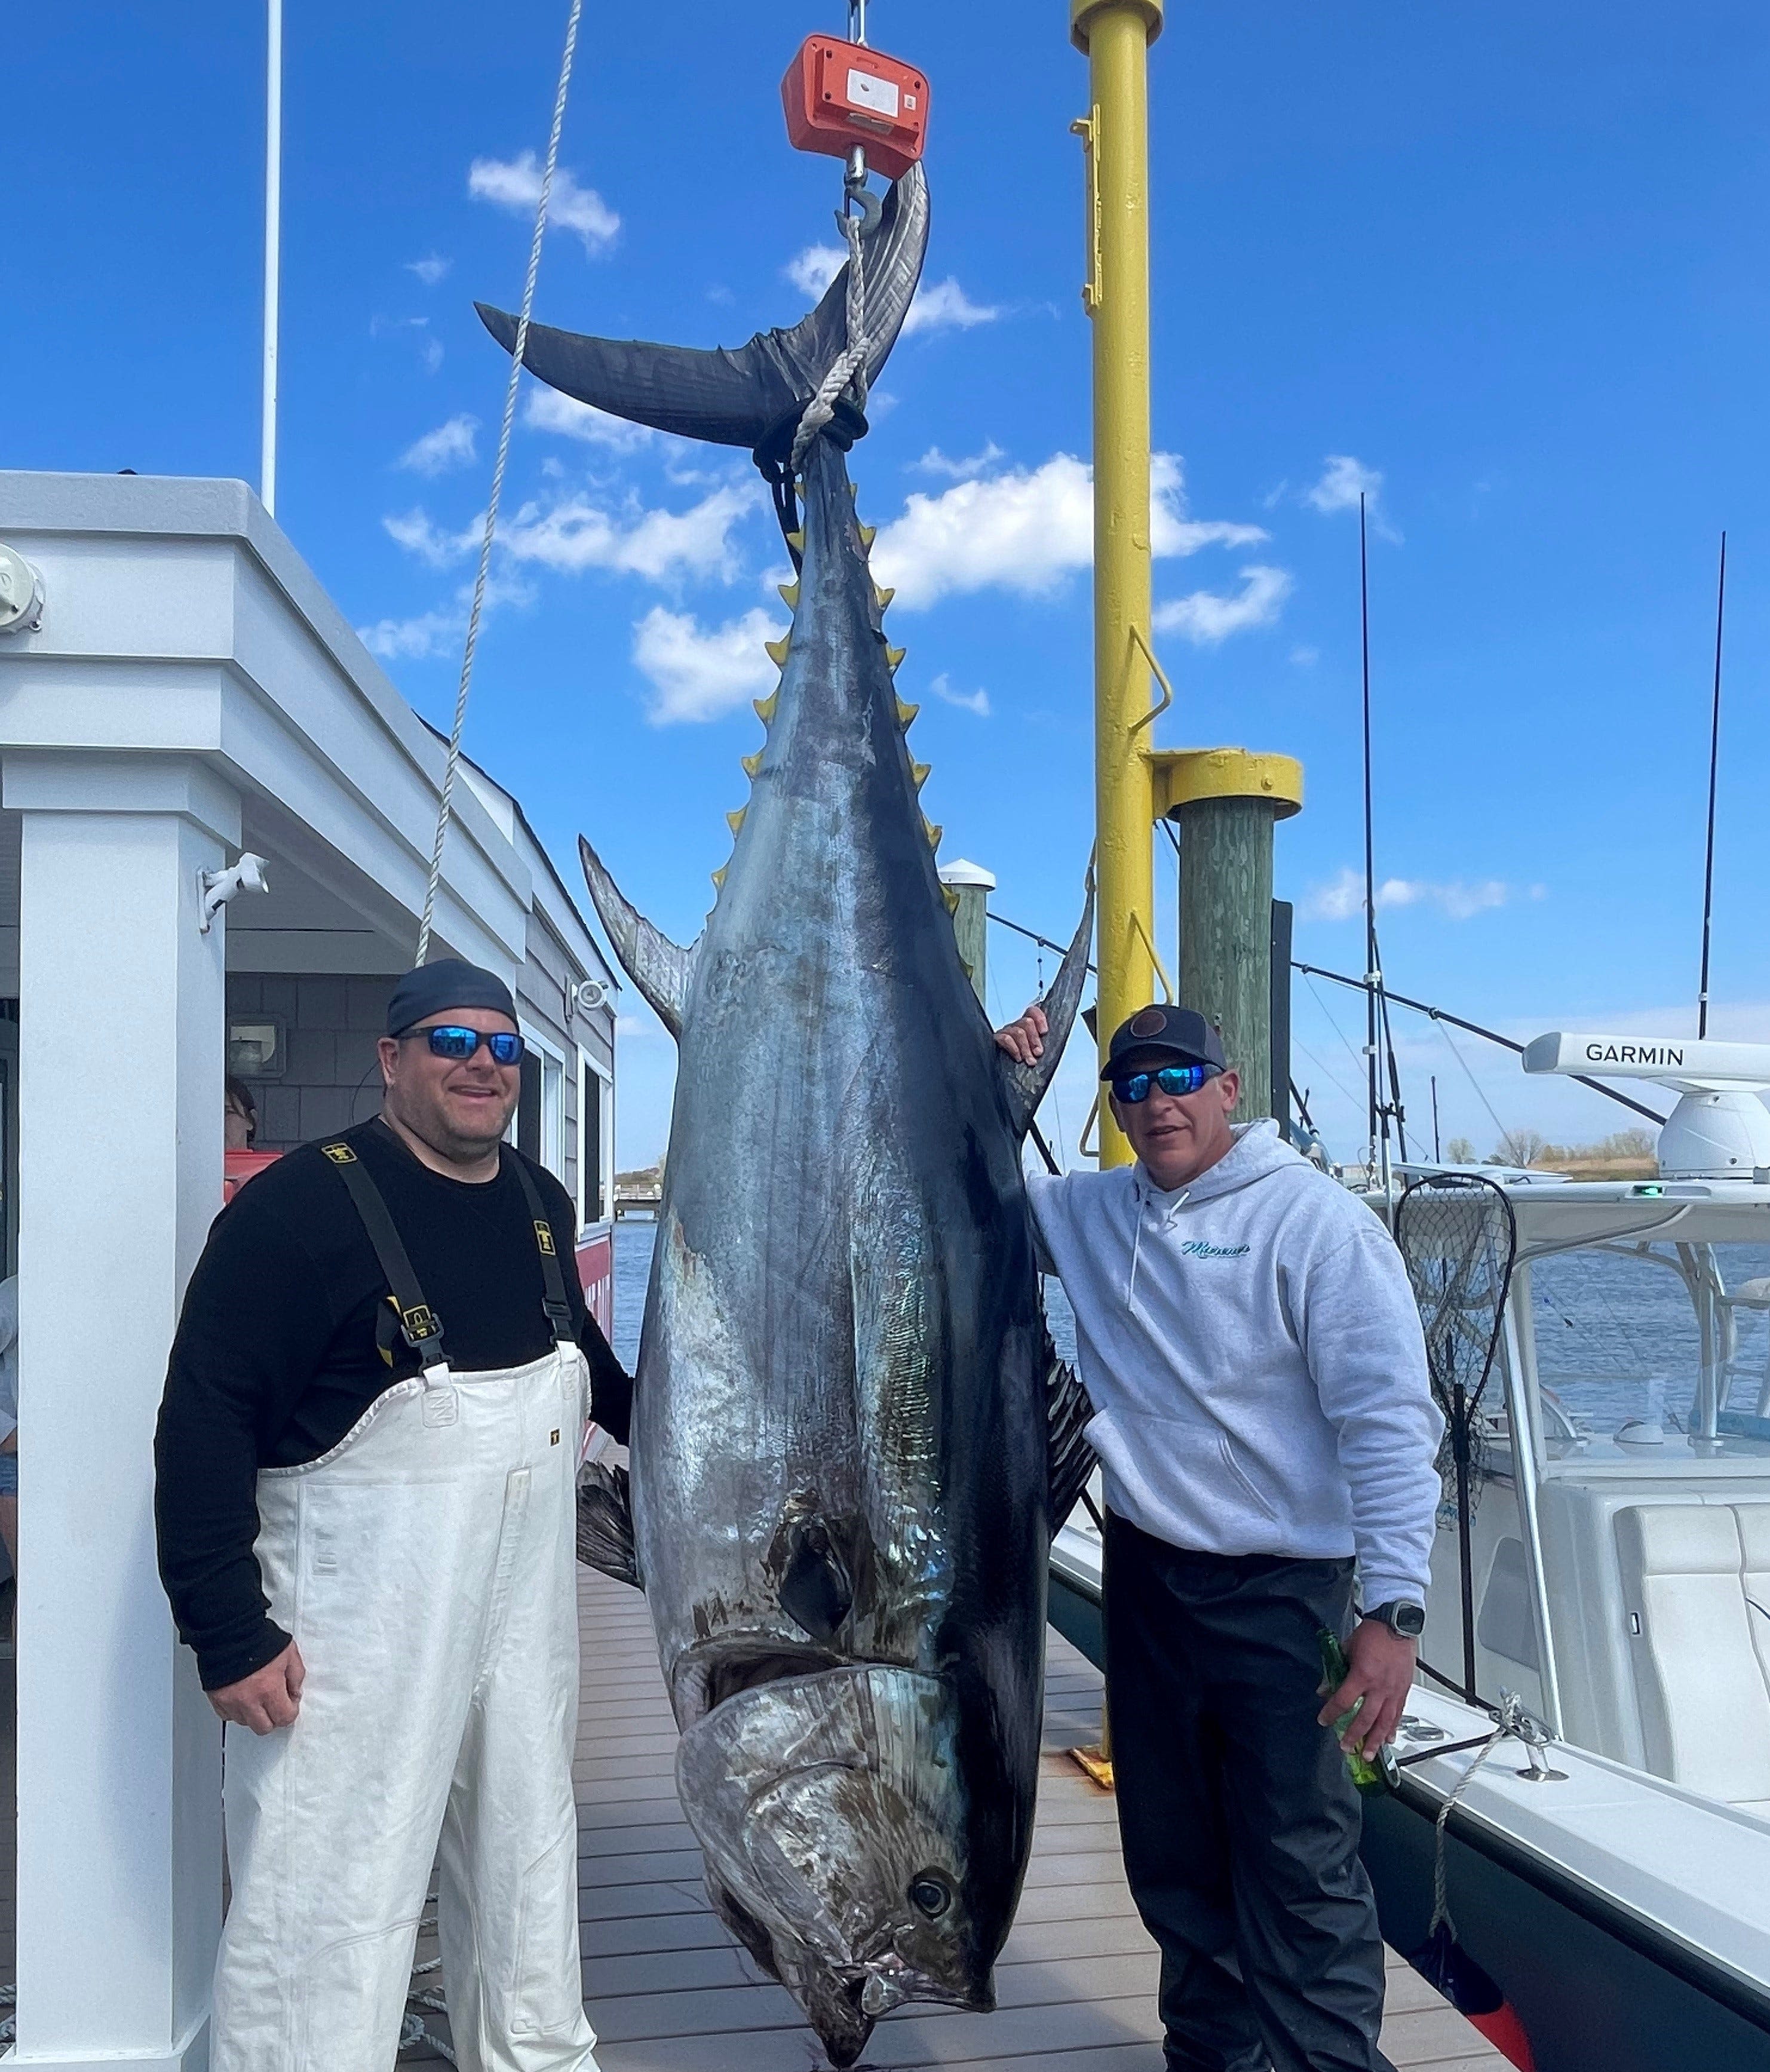 After 4-hour fight, 2 fishermen land 718-pound giant bluefin tuna off New Jersey coast